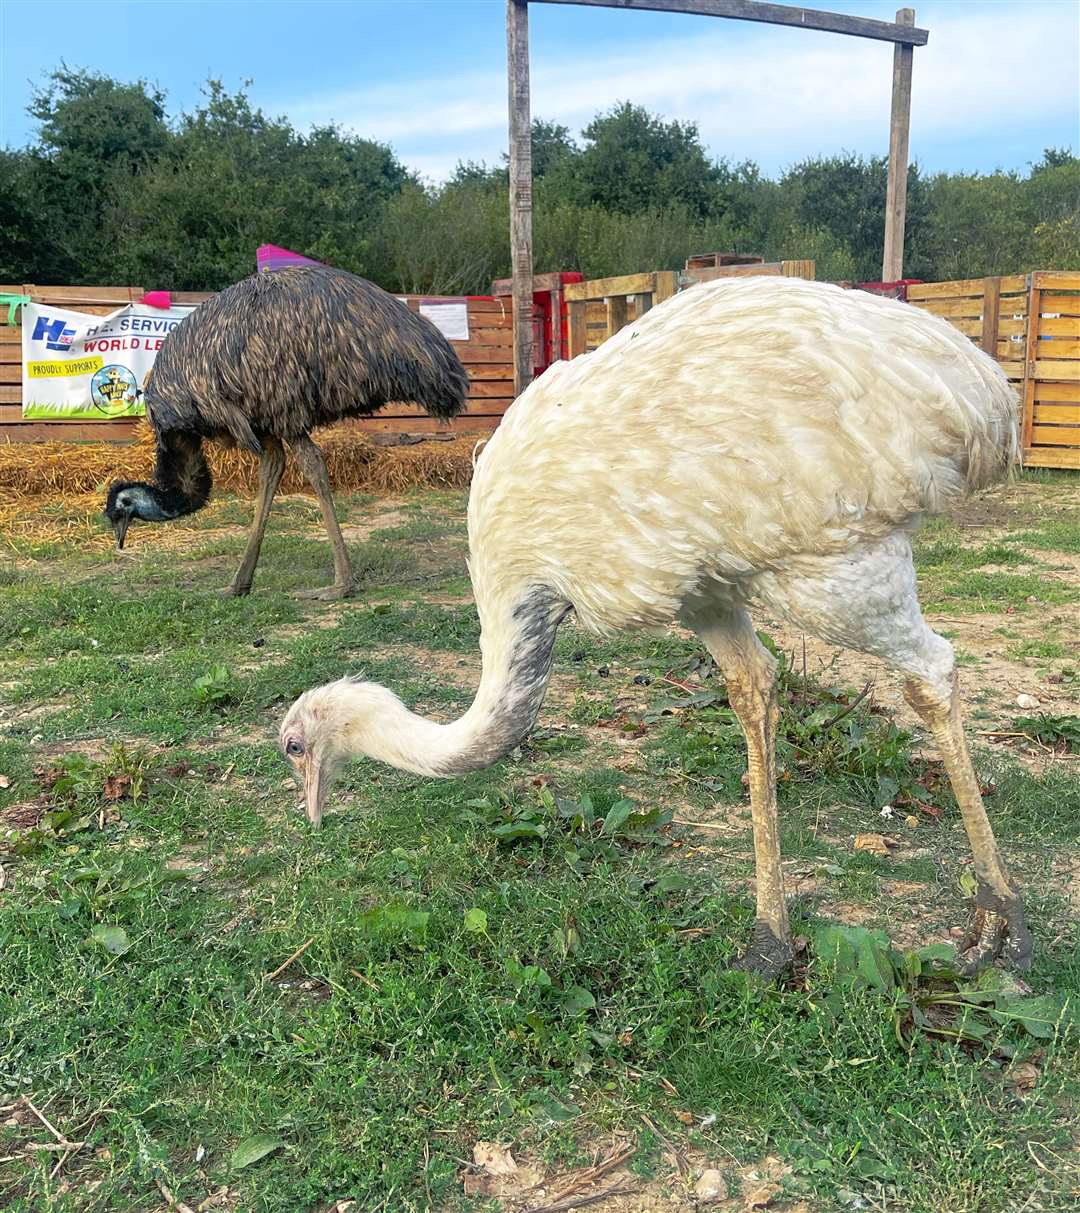 Seven-year-old Dougie was the only animal to escape from the sanctuary, as a south American ostrich, a rheas called Rogue, stayed put as the emu fled